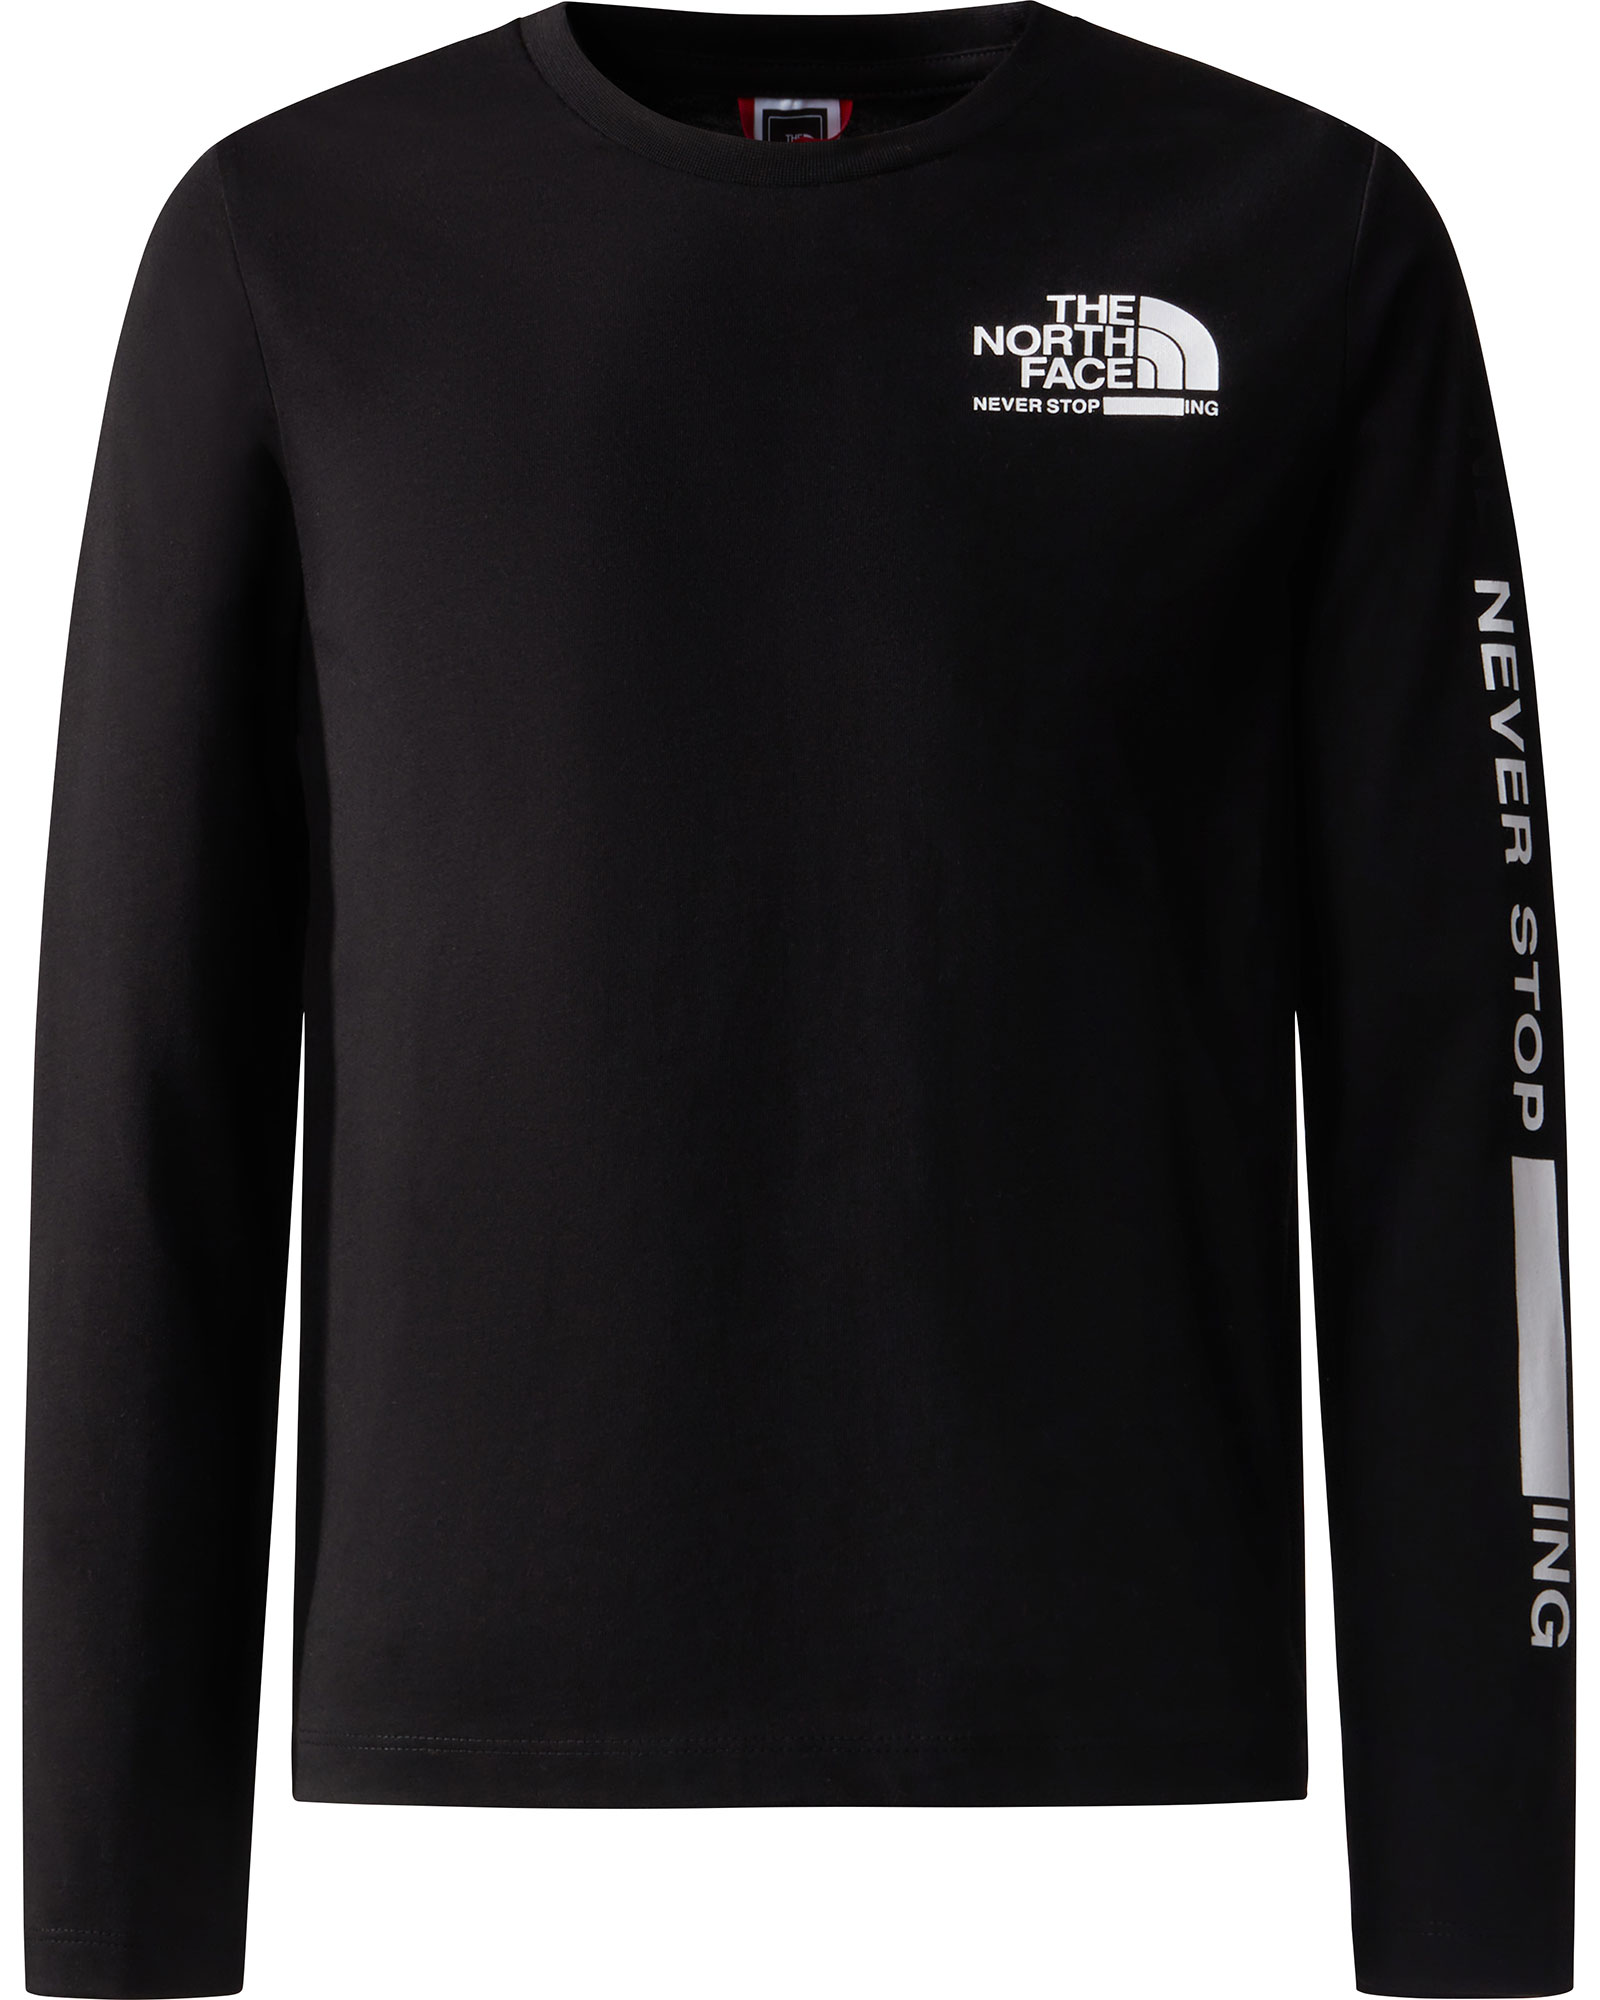 The North Face Youth Graphic Long Sleeved T Shirt 2 - TNF Black XL